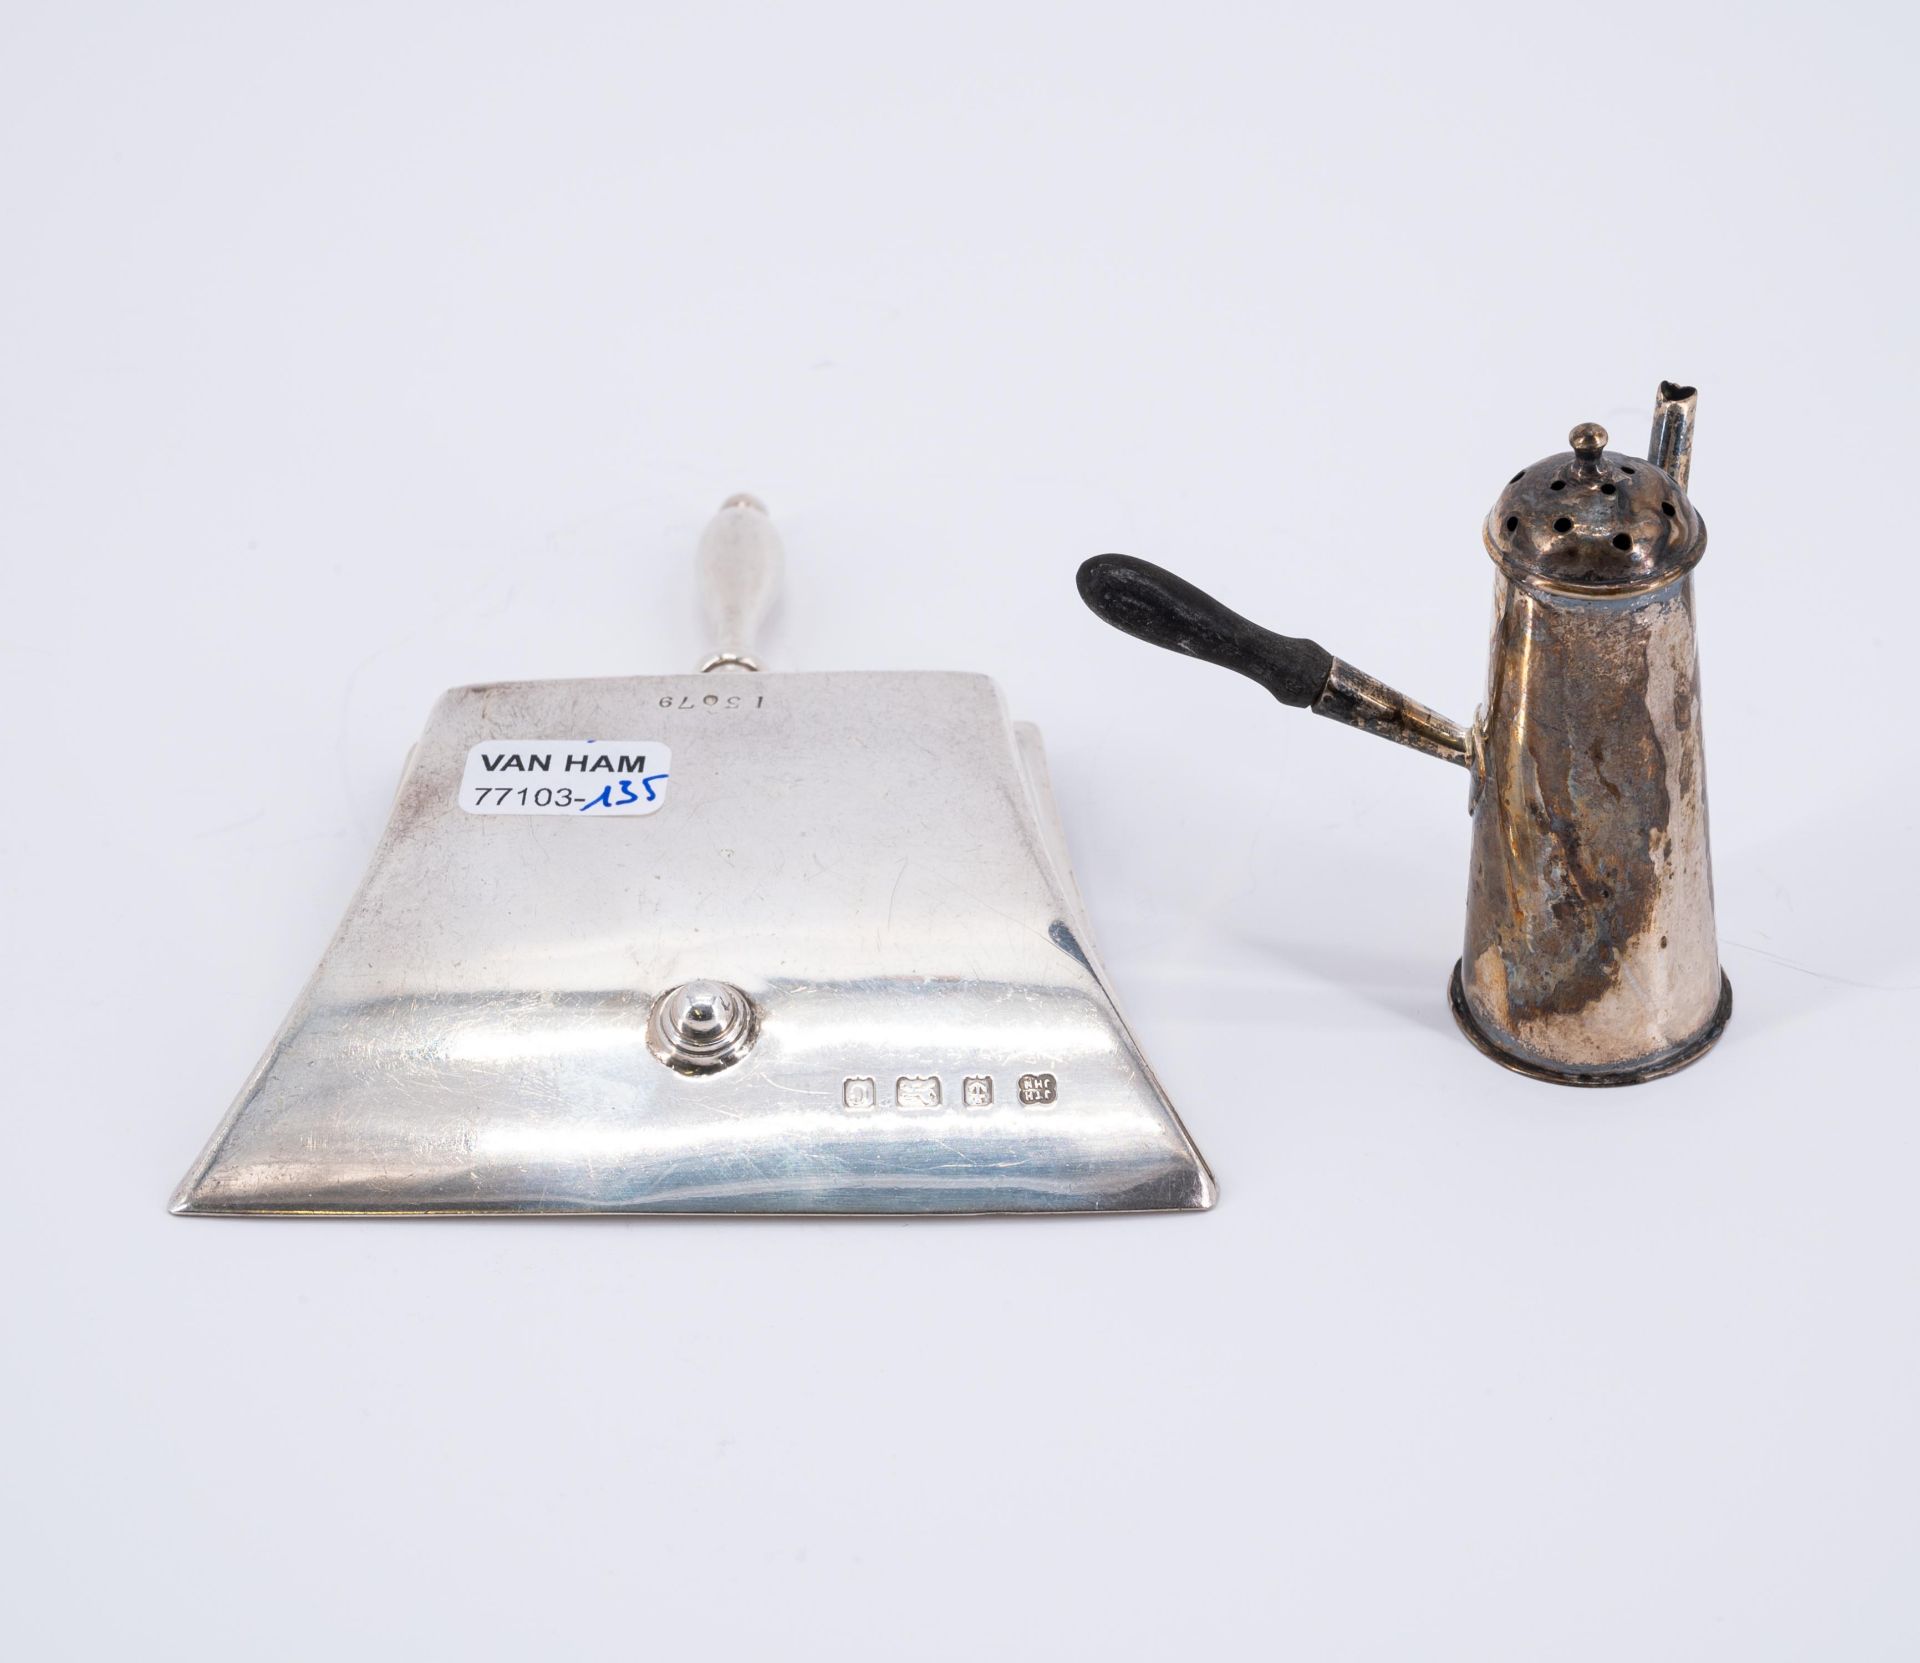 TWO SILVER MINIATURE SERVICES, SILVER MINIATURE CHOCOLADE POT, SILVER MINIATURE DUSTPAN - Image 3 of 7